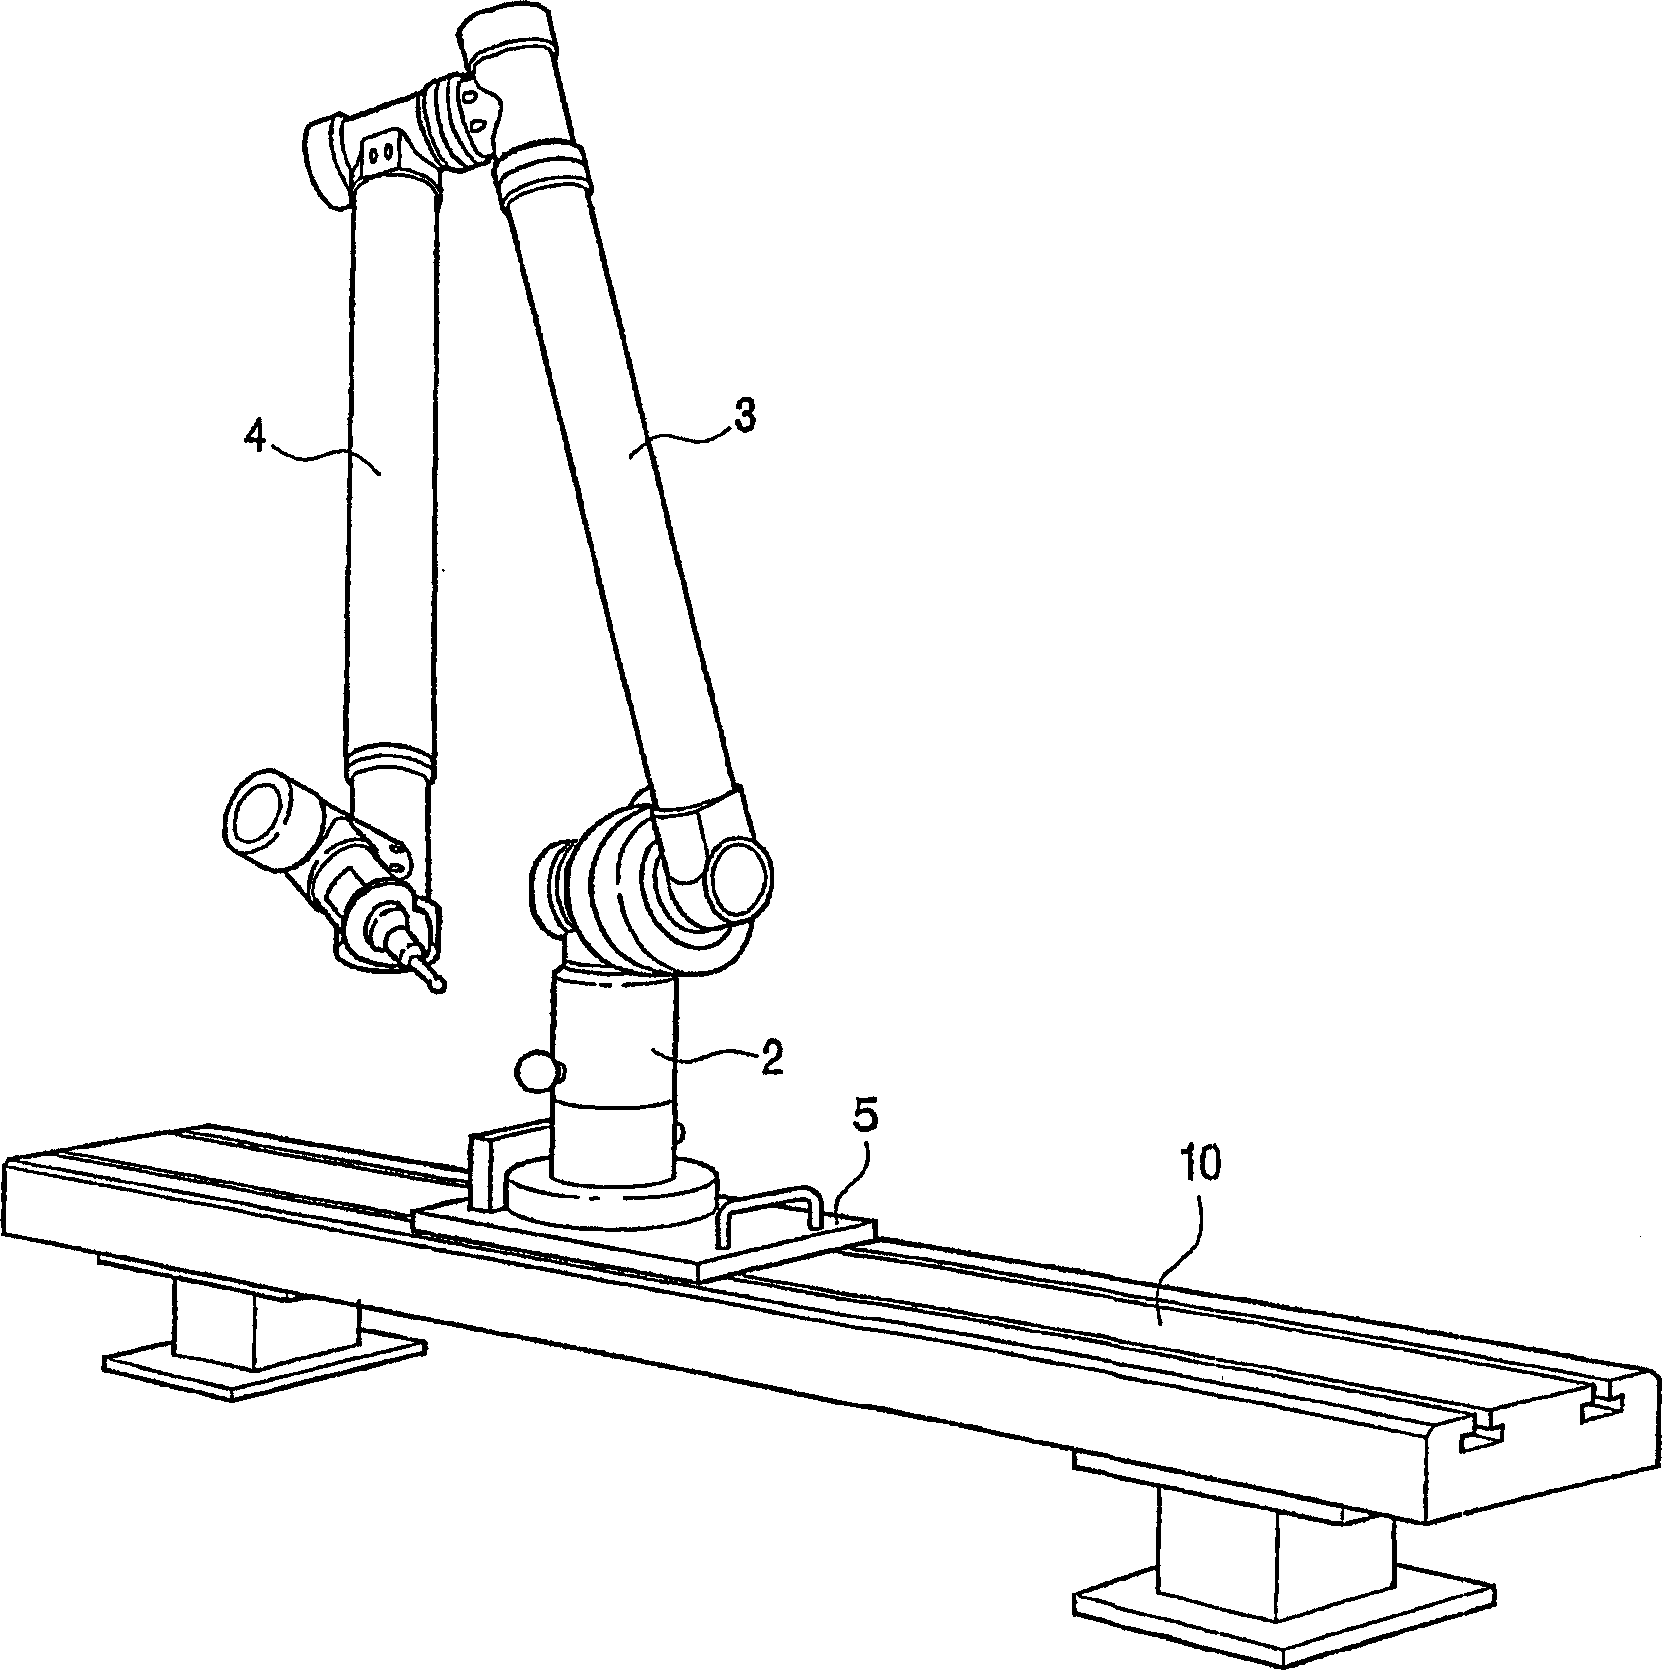 Method and apparatus for scanning corrosion and surface defects